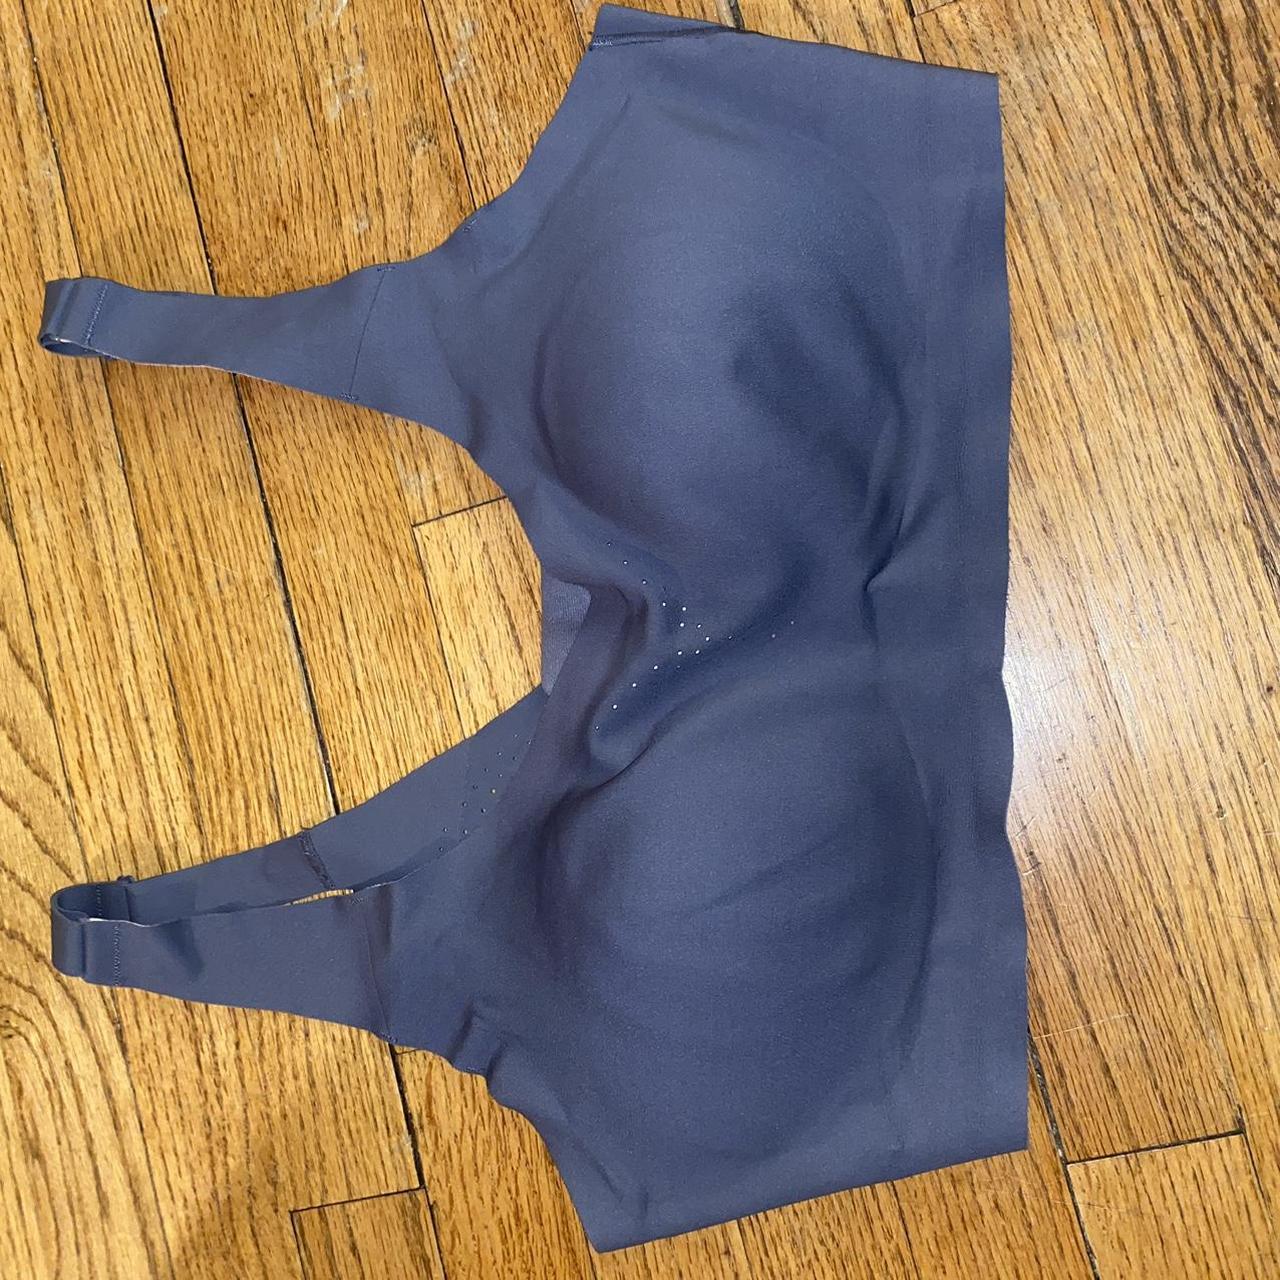 NWOT Avia Sports Bra SIZE XL! This is a comfortable - Depop